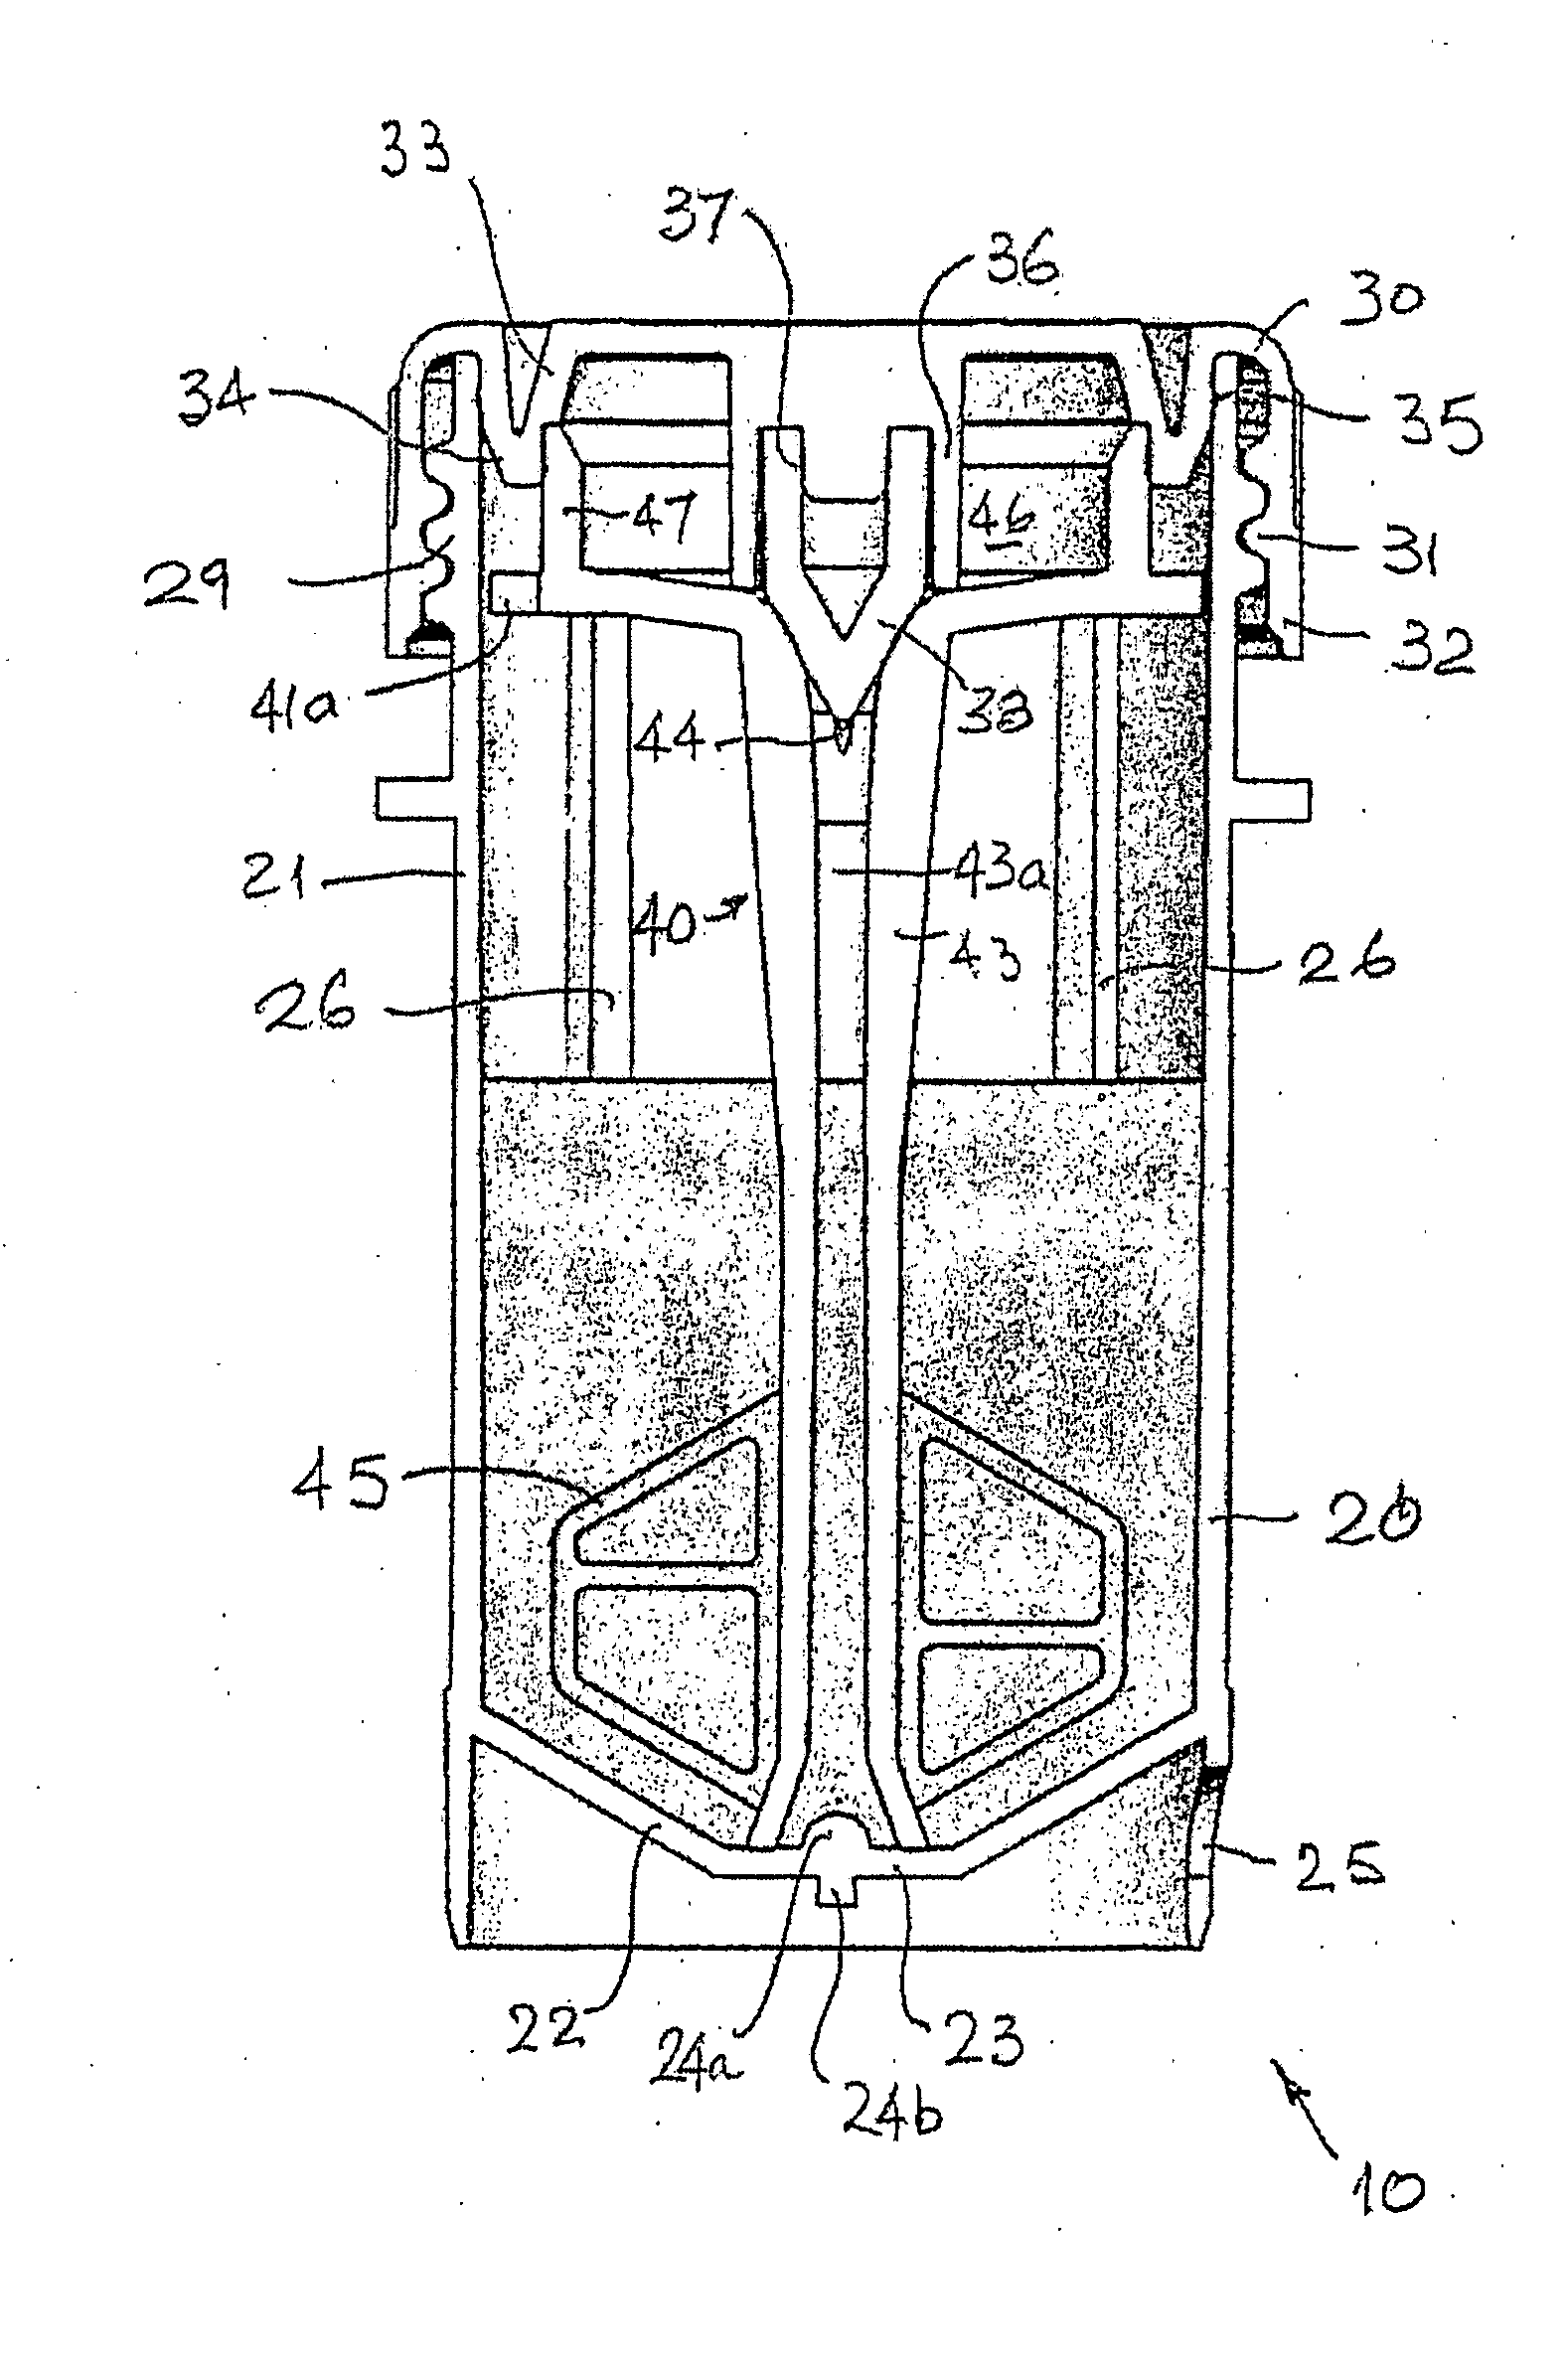 Vial Assembly, Sampling Apparatus And Method For Processing Liquid-Based Specimens